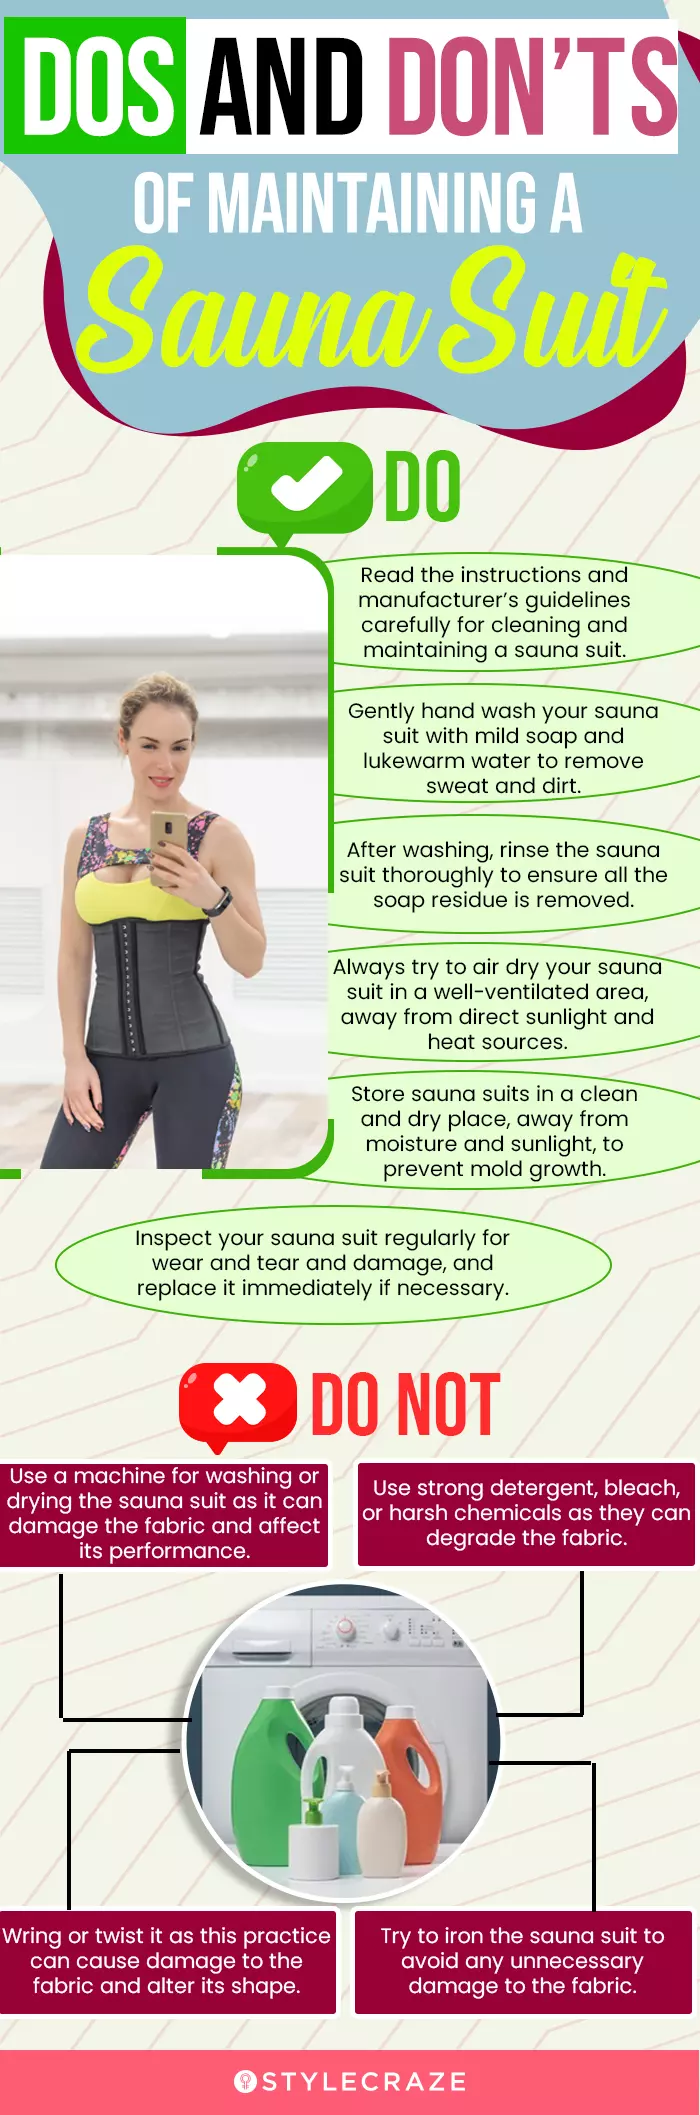 Dos And Don’ts Of Maintaining Sauna Suit (infographic)